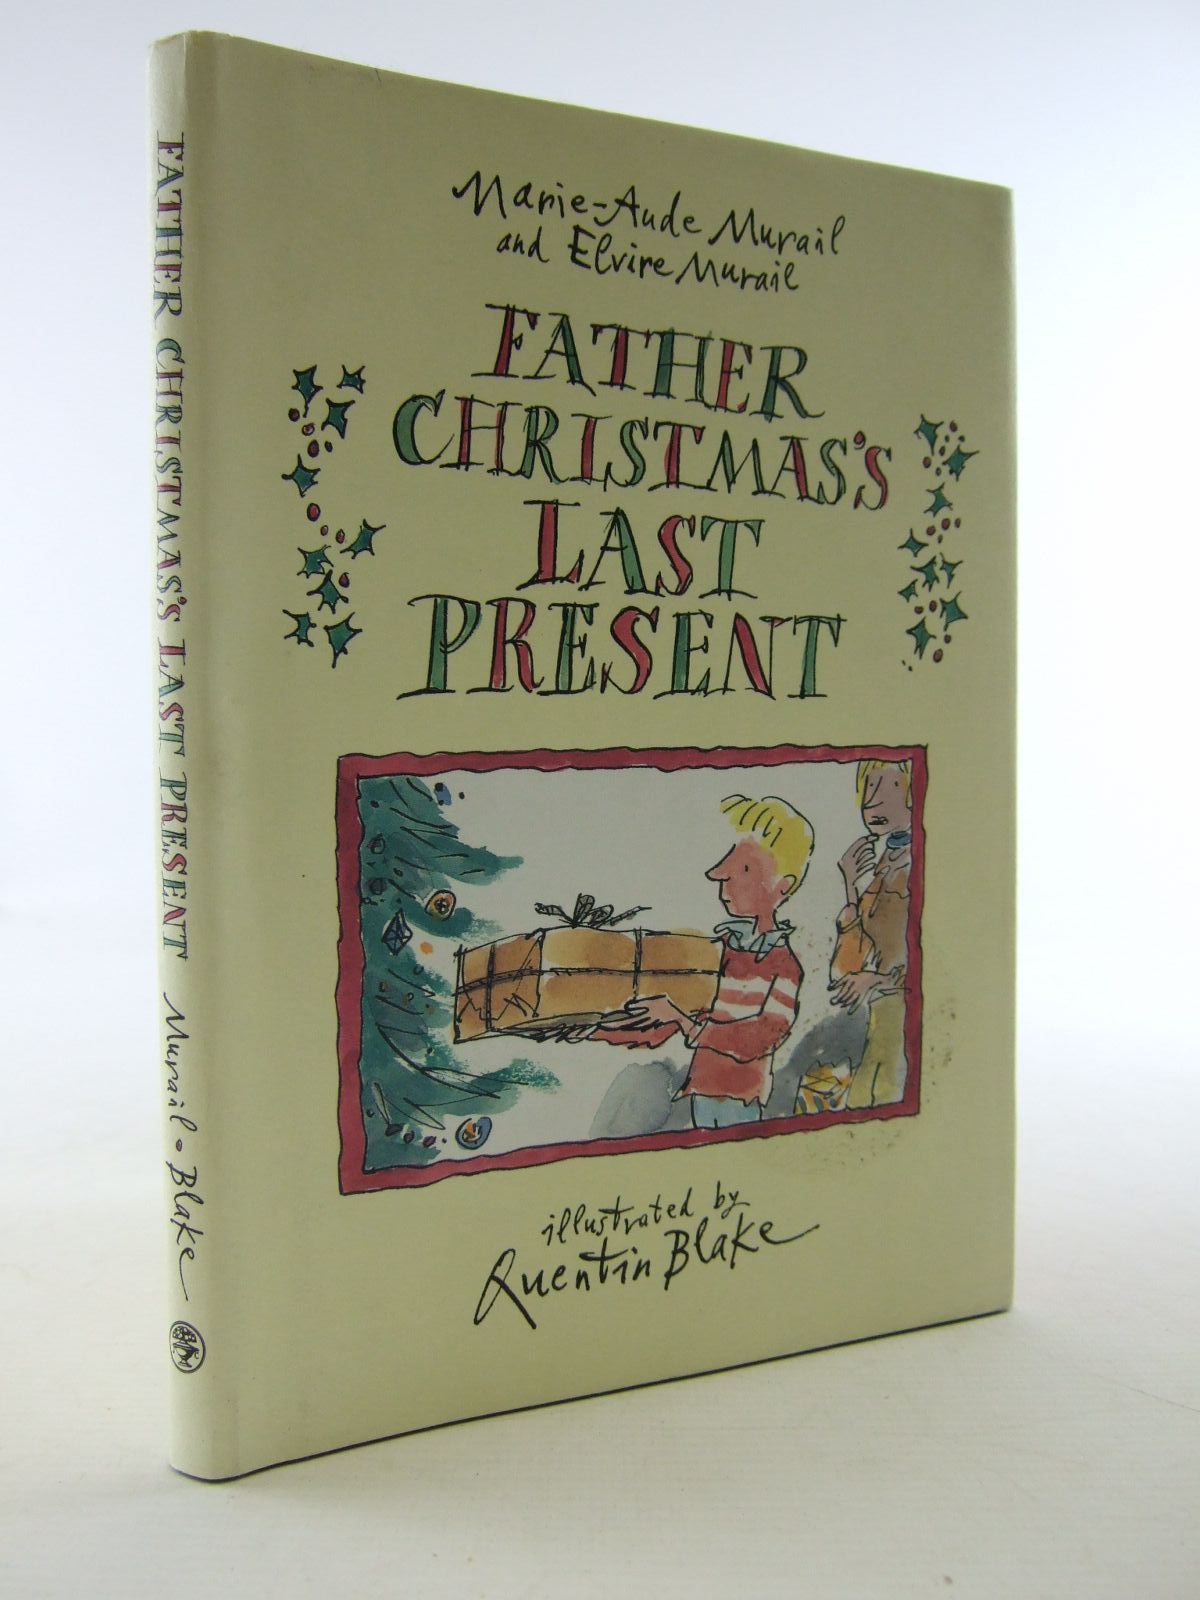 Photo of FATHER CHRISTMAS'S LAST PRESENT written by Murail, Marie-Aude Murail, Elvire illustrated by Blake, Quentin published by Jonathan Cape (STOCK CODE: 2108520)  for sale by Stella & Rose's Books